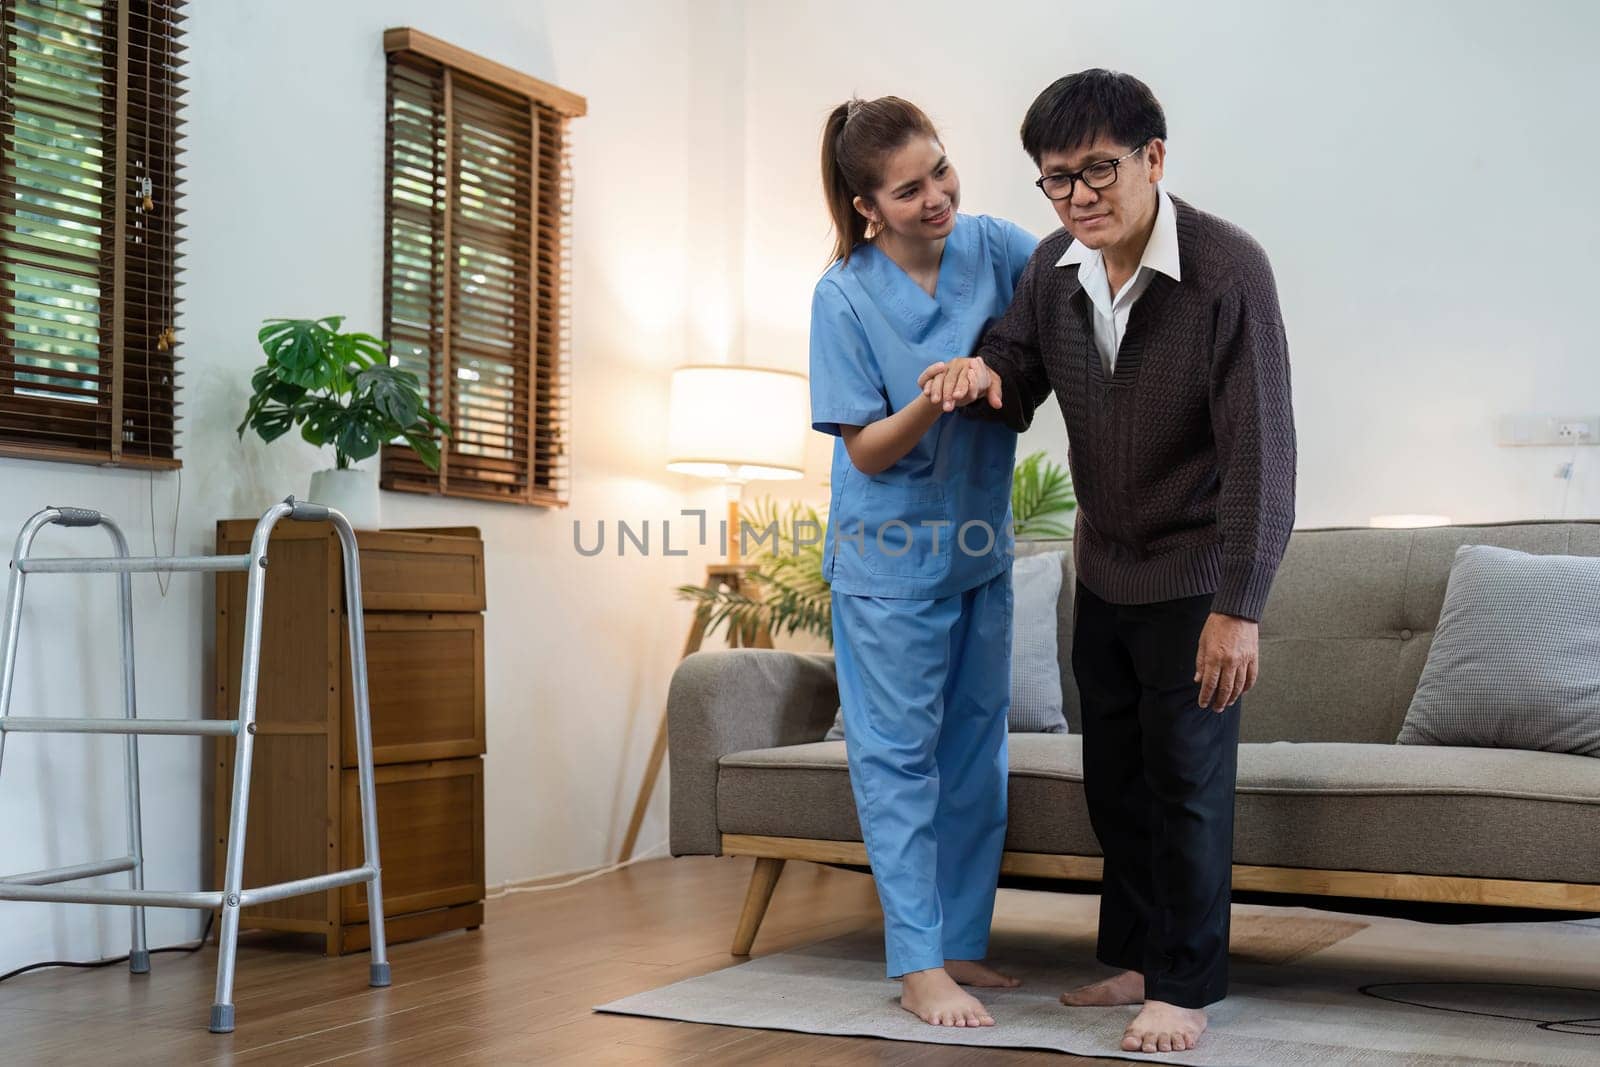 A woman in a blue uniform helps an older man with a walker. The scene is set in a living room with a couch and a potted plant. Scene is caring and supportive